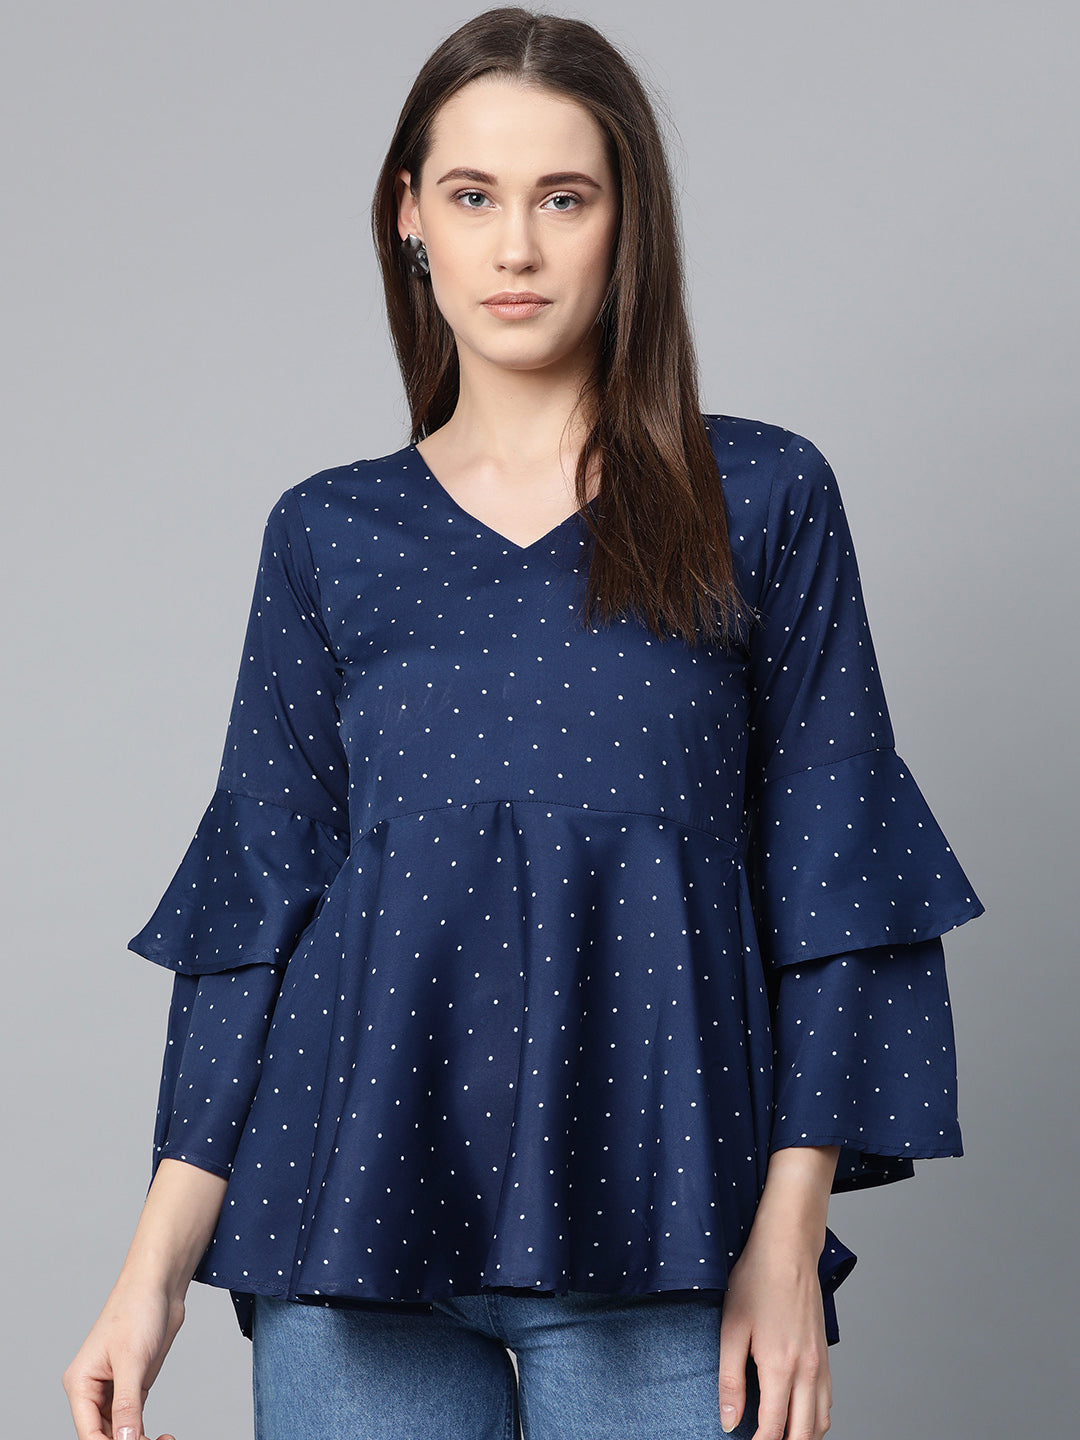 Jompers Women Navy Blue & White Printed A-Line Top